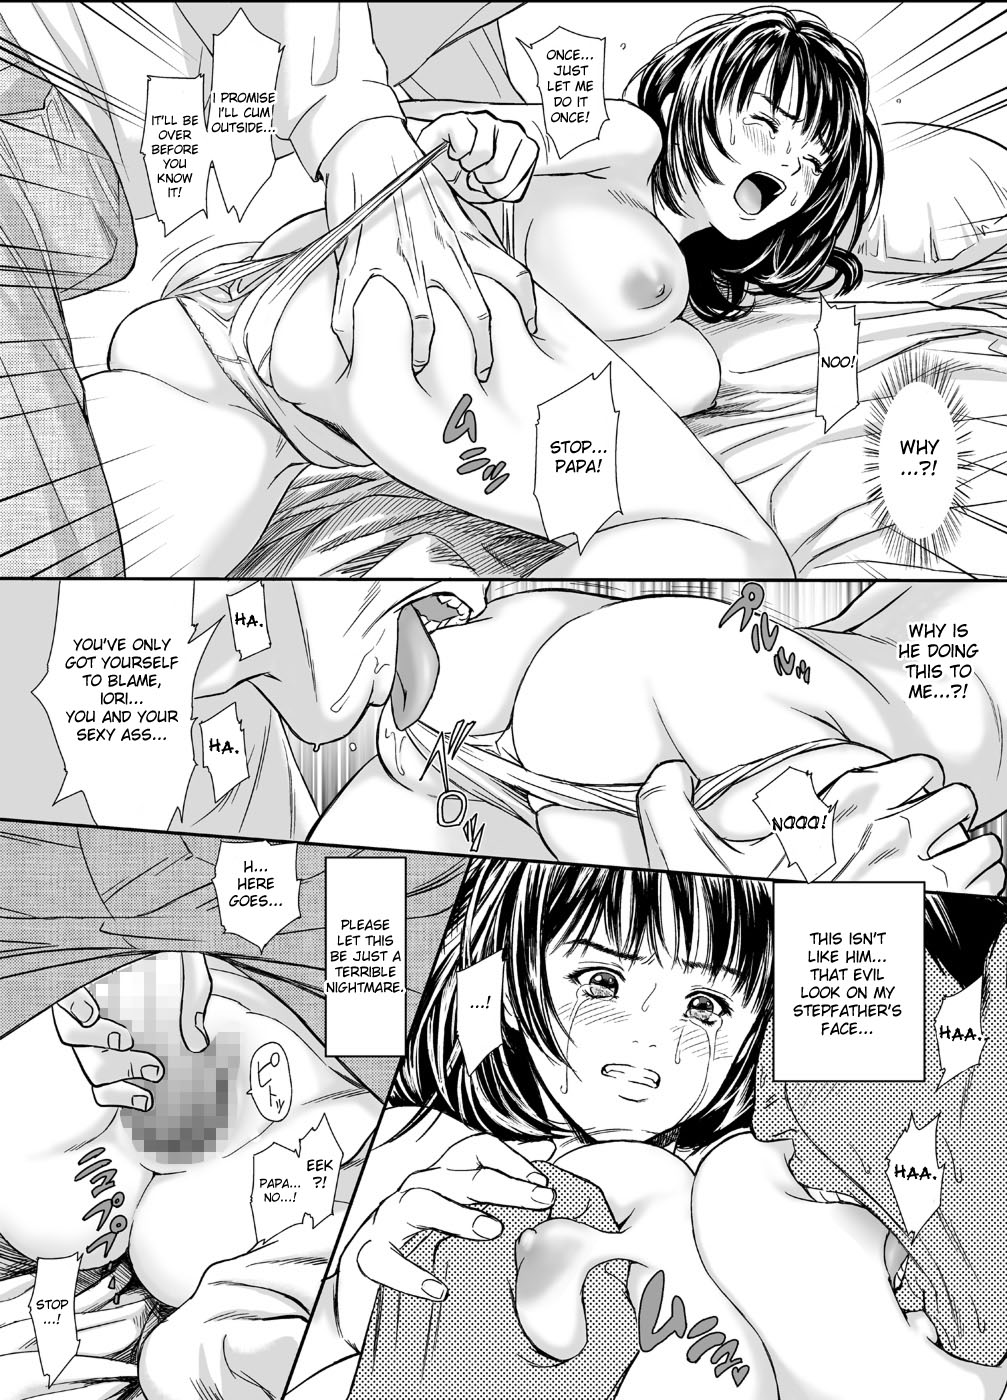 [Redlight] Iori - The Dark Side Of That Girl (Is) [English] page 5 full